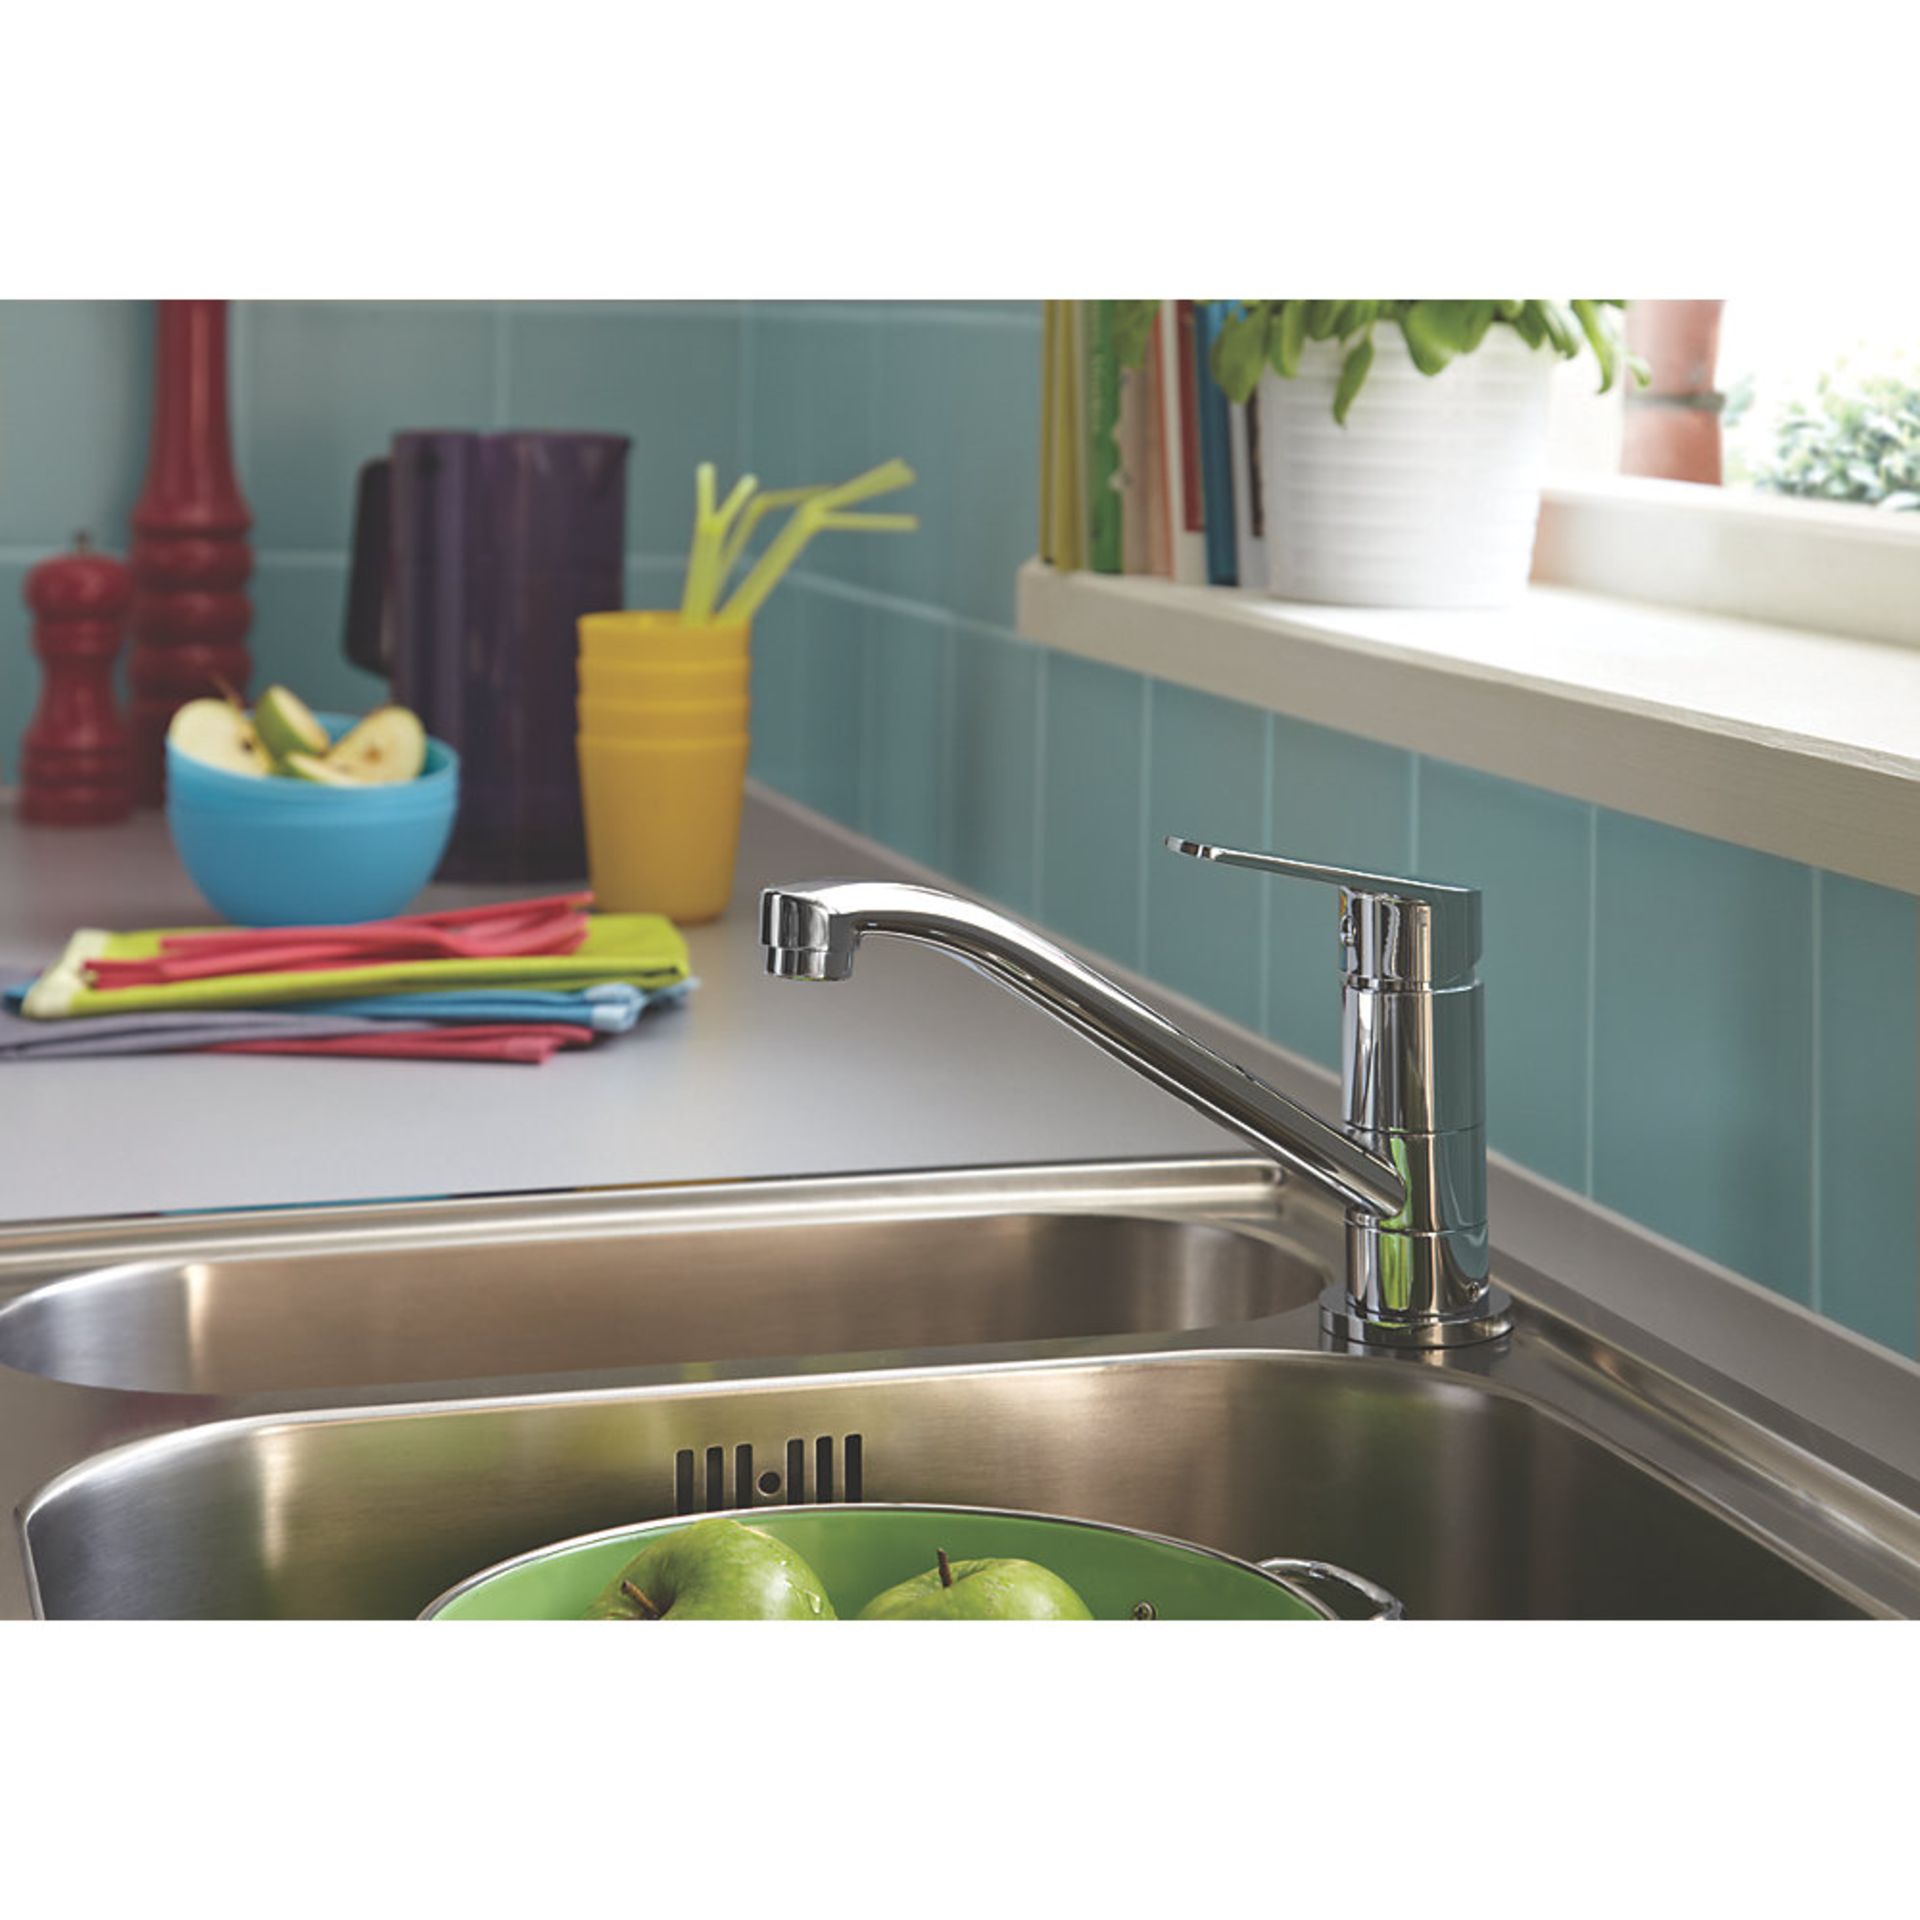 NEW (MC142) BRISTAN CINNAMON MONO MIXER KITCHEN TAP CHROME. Surface-Mounted with Long-Armed Spo... - Image 2 of 3